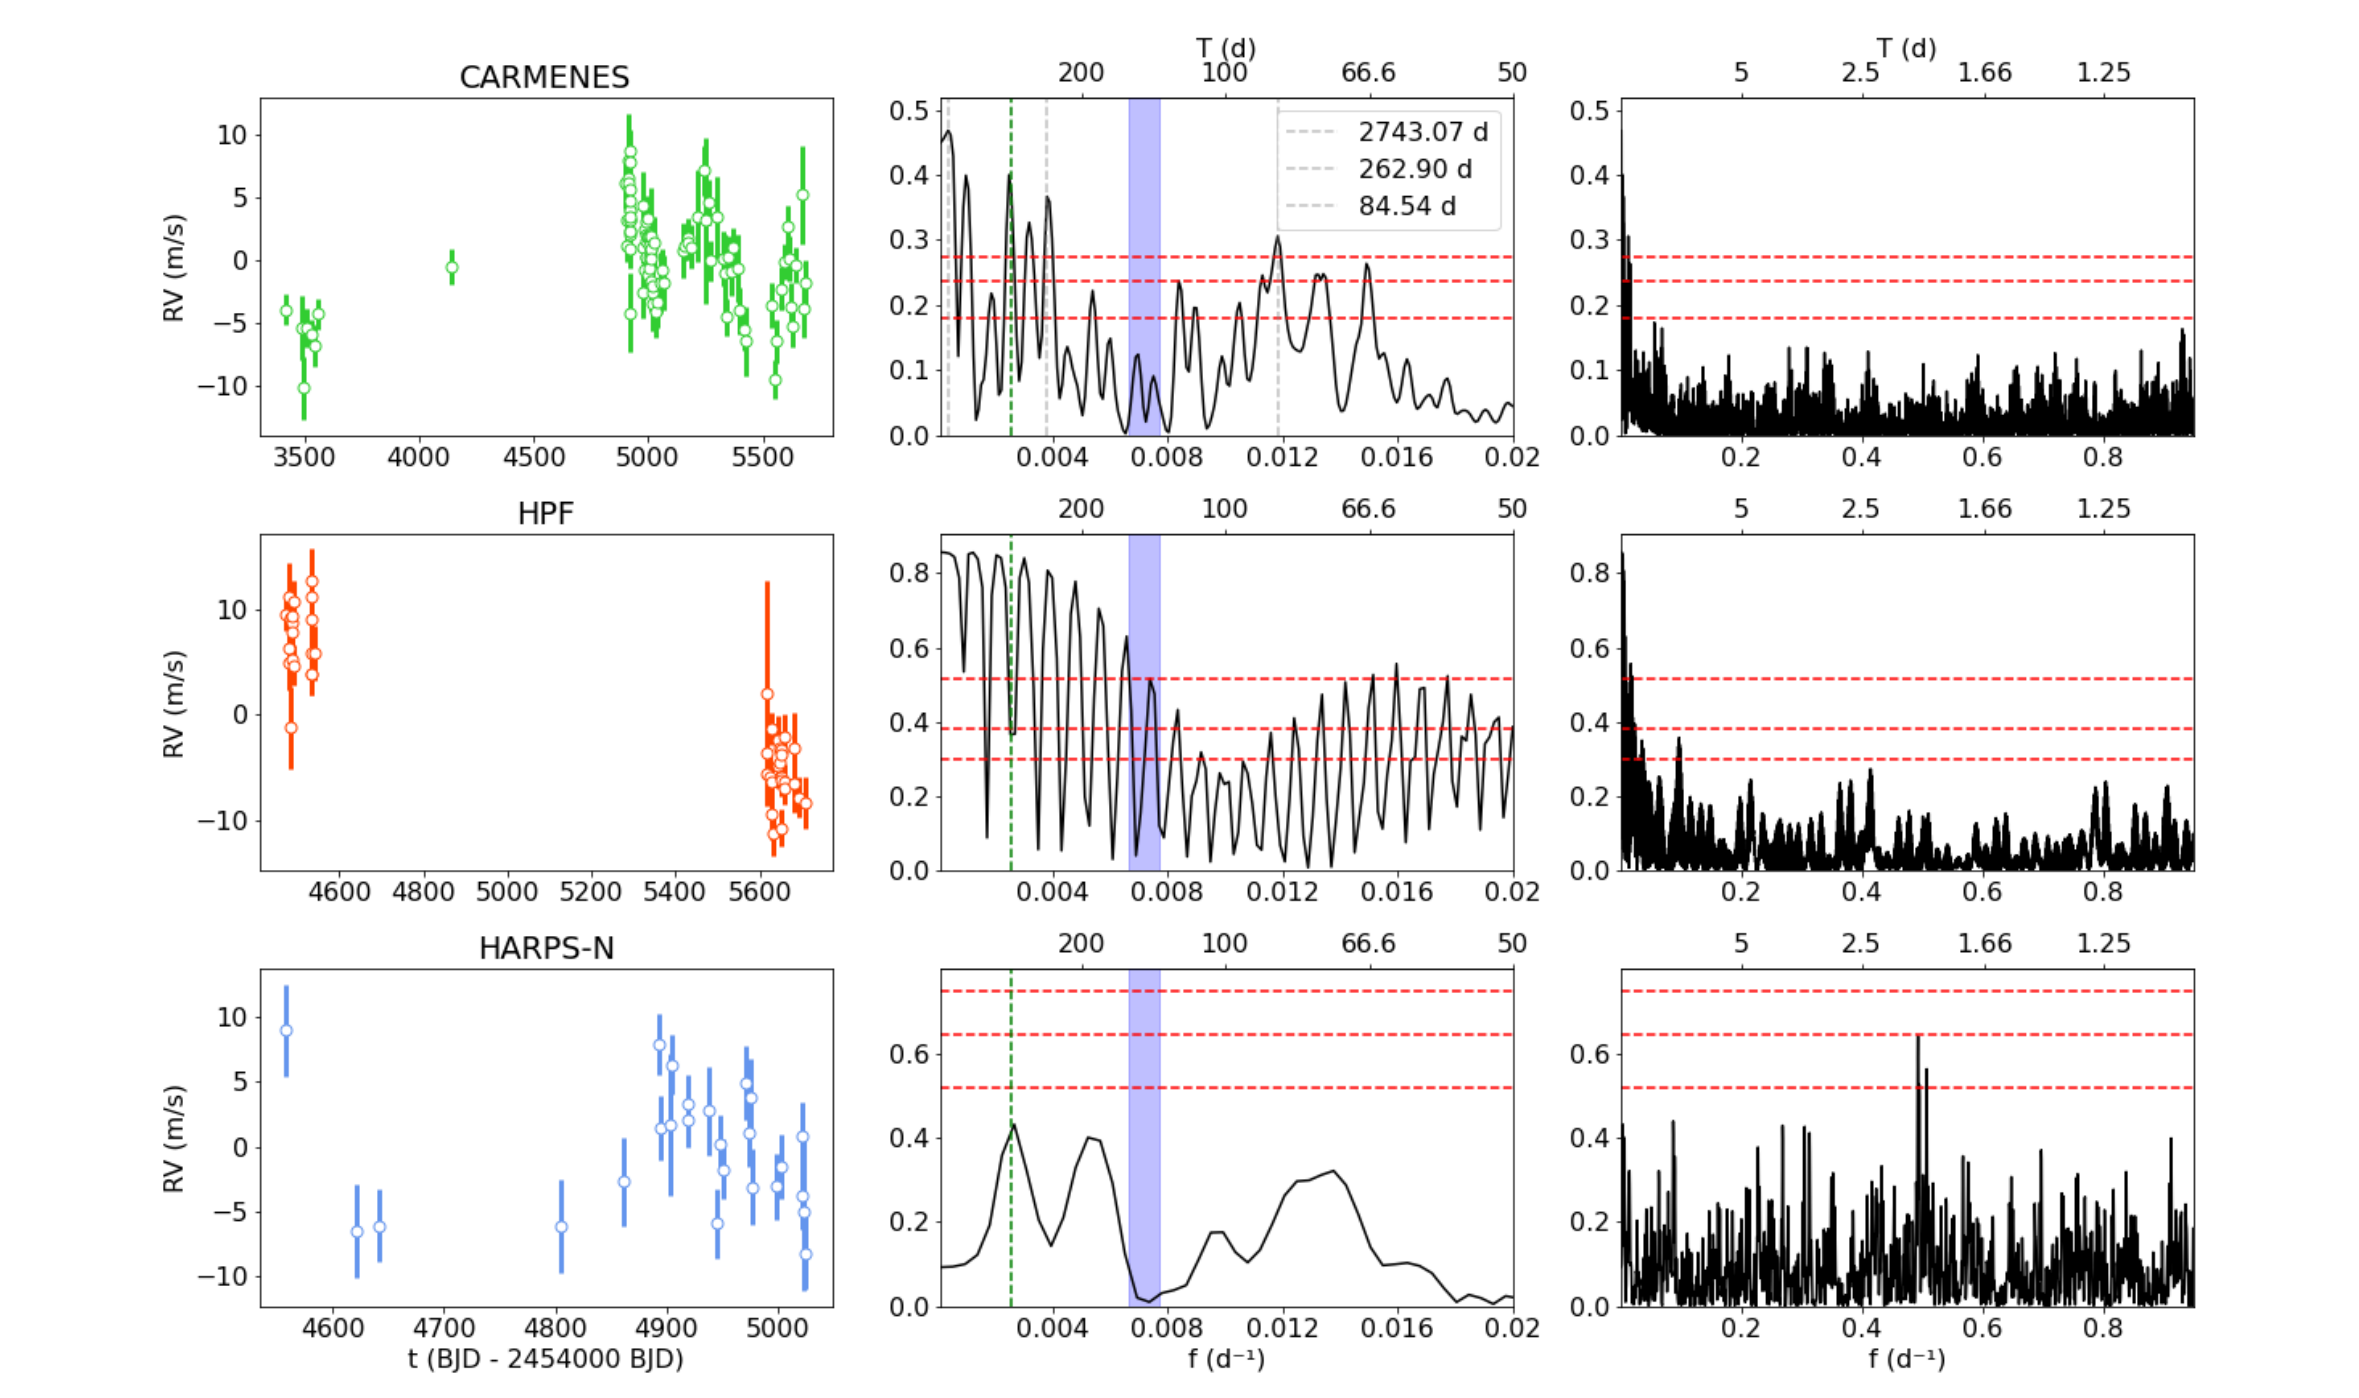 A Long-period Planet Around GJ 1151 Measured With CARMENES And HARPS-N Data